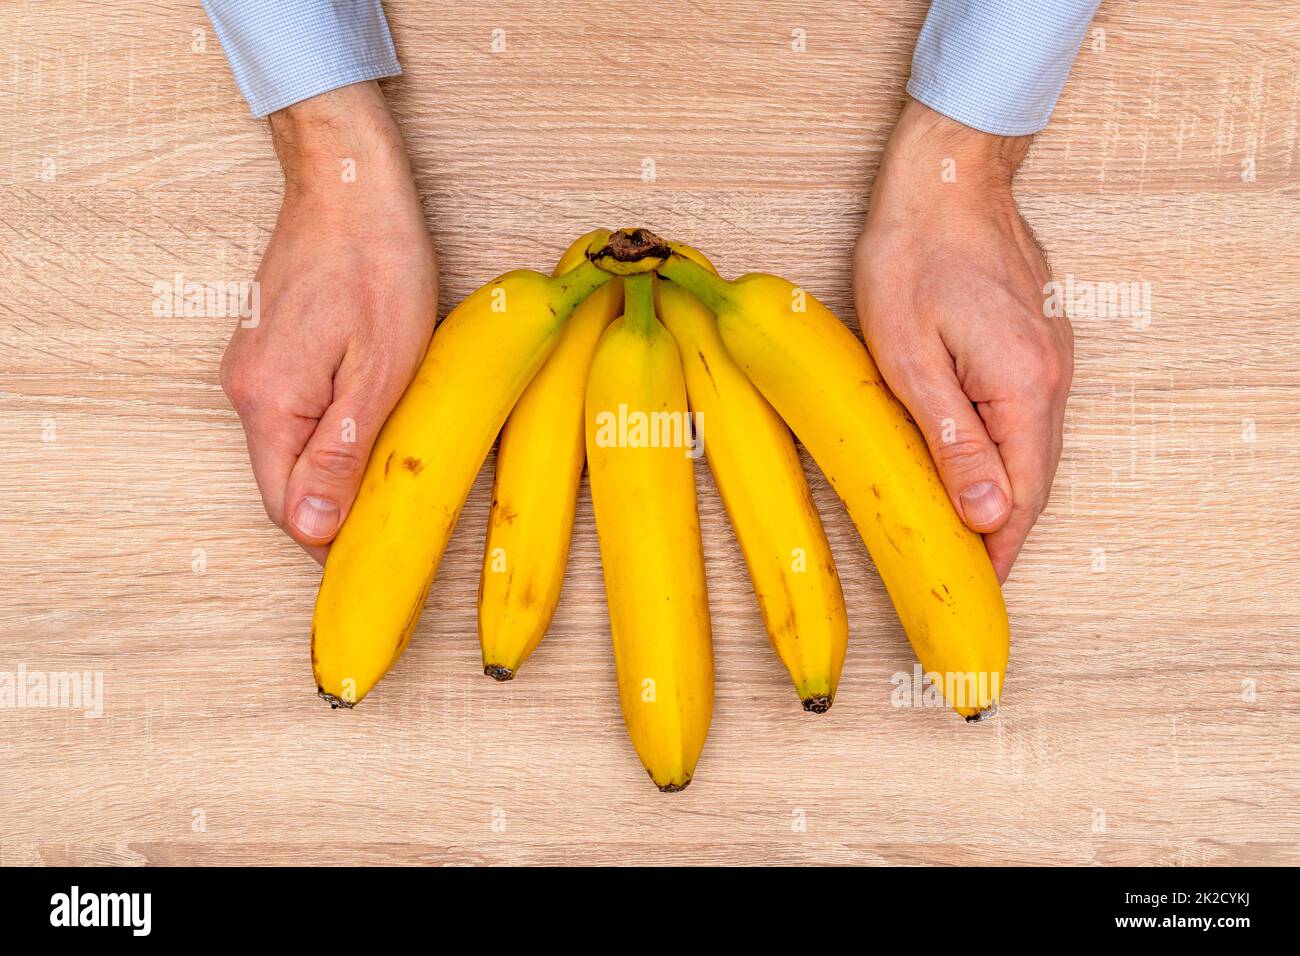 Hands Holds Bunch Of Fresh  Banana On The Table Background Stock Photo